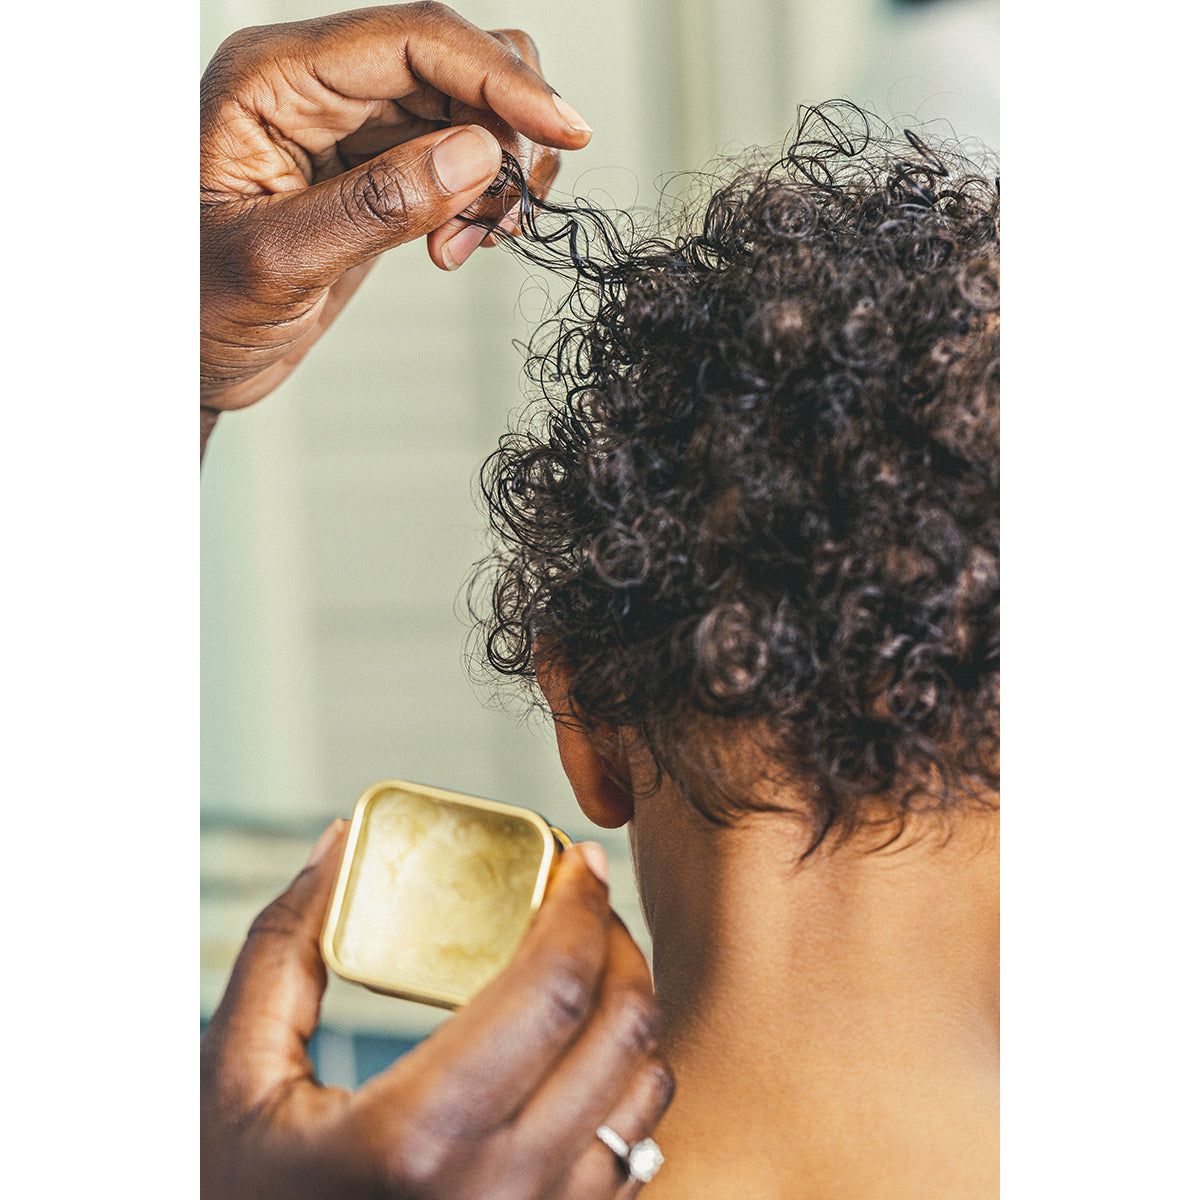 Shea butter being applied to the curly hair of a child for hair care and moisture